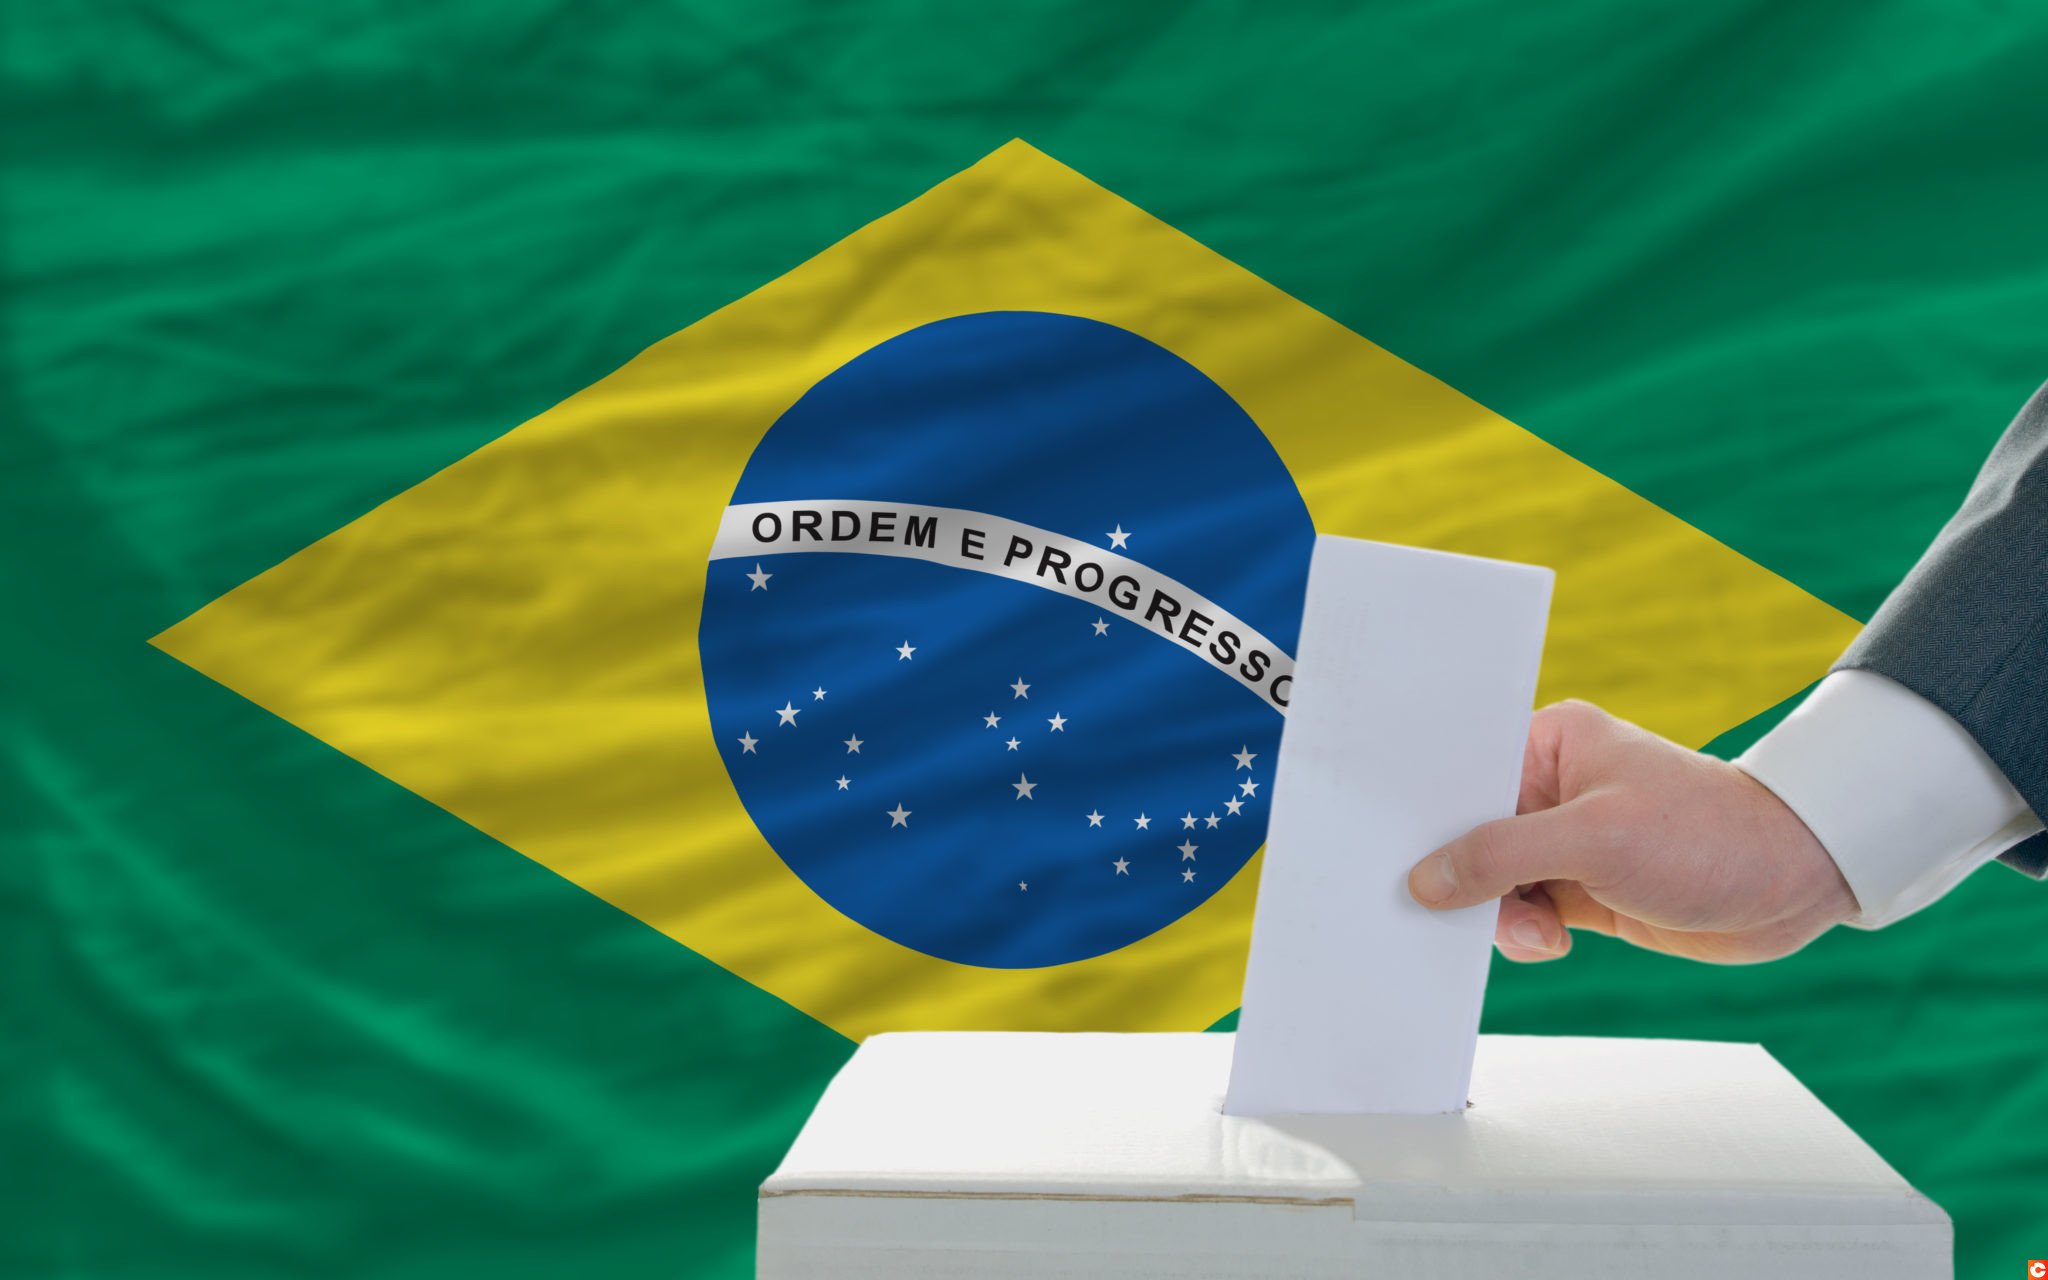 Now you can bet on Bolsonaro’s re-election campaign with FTX